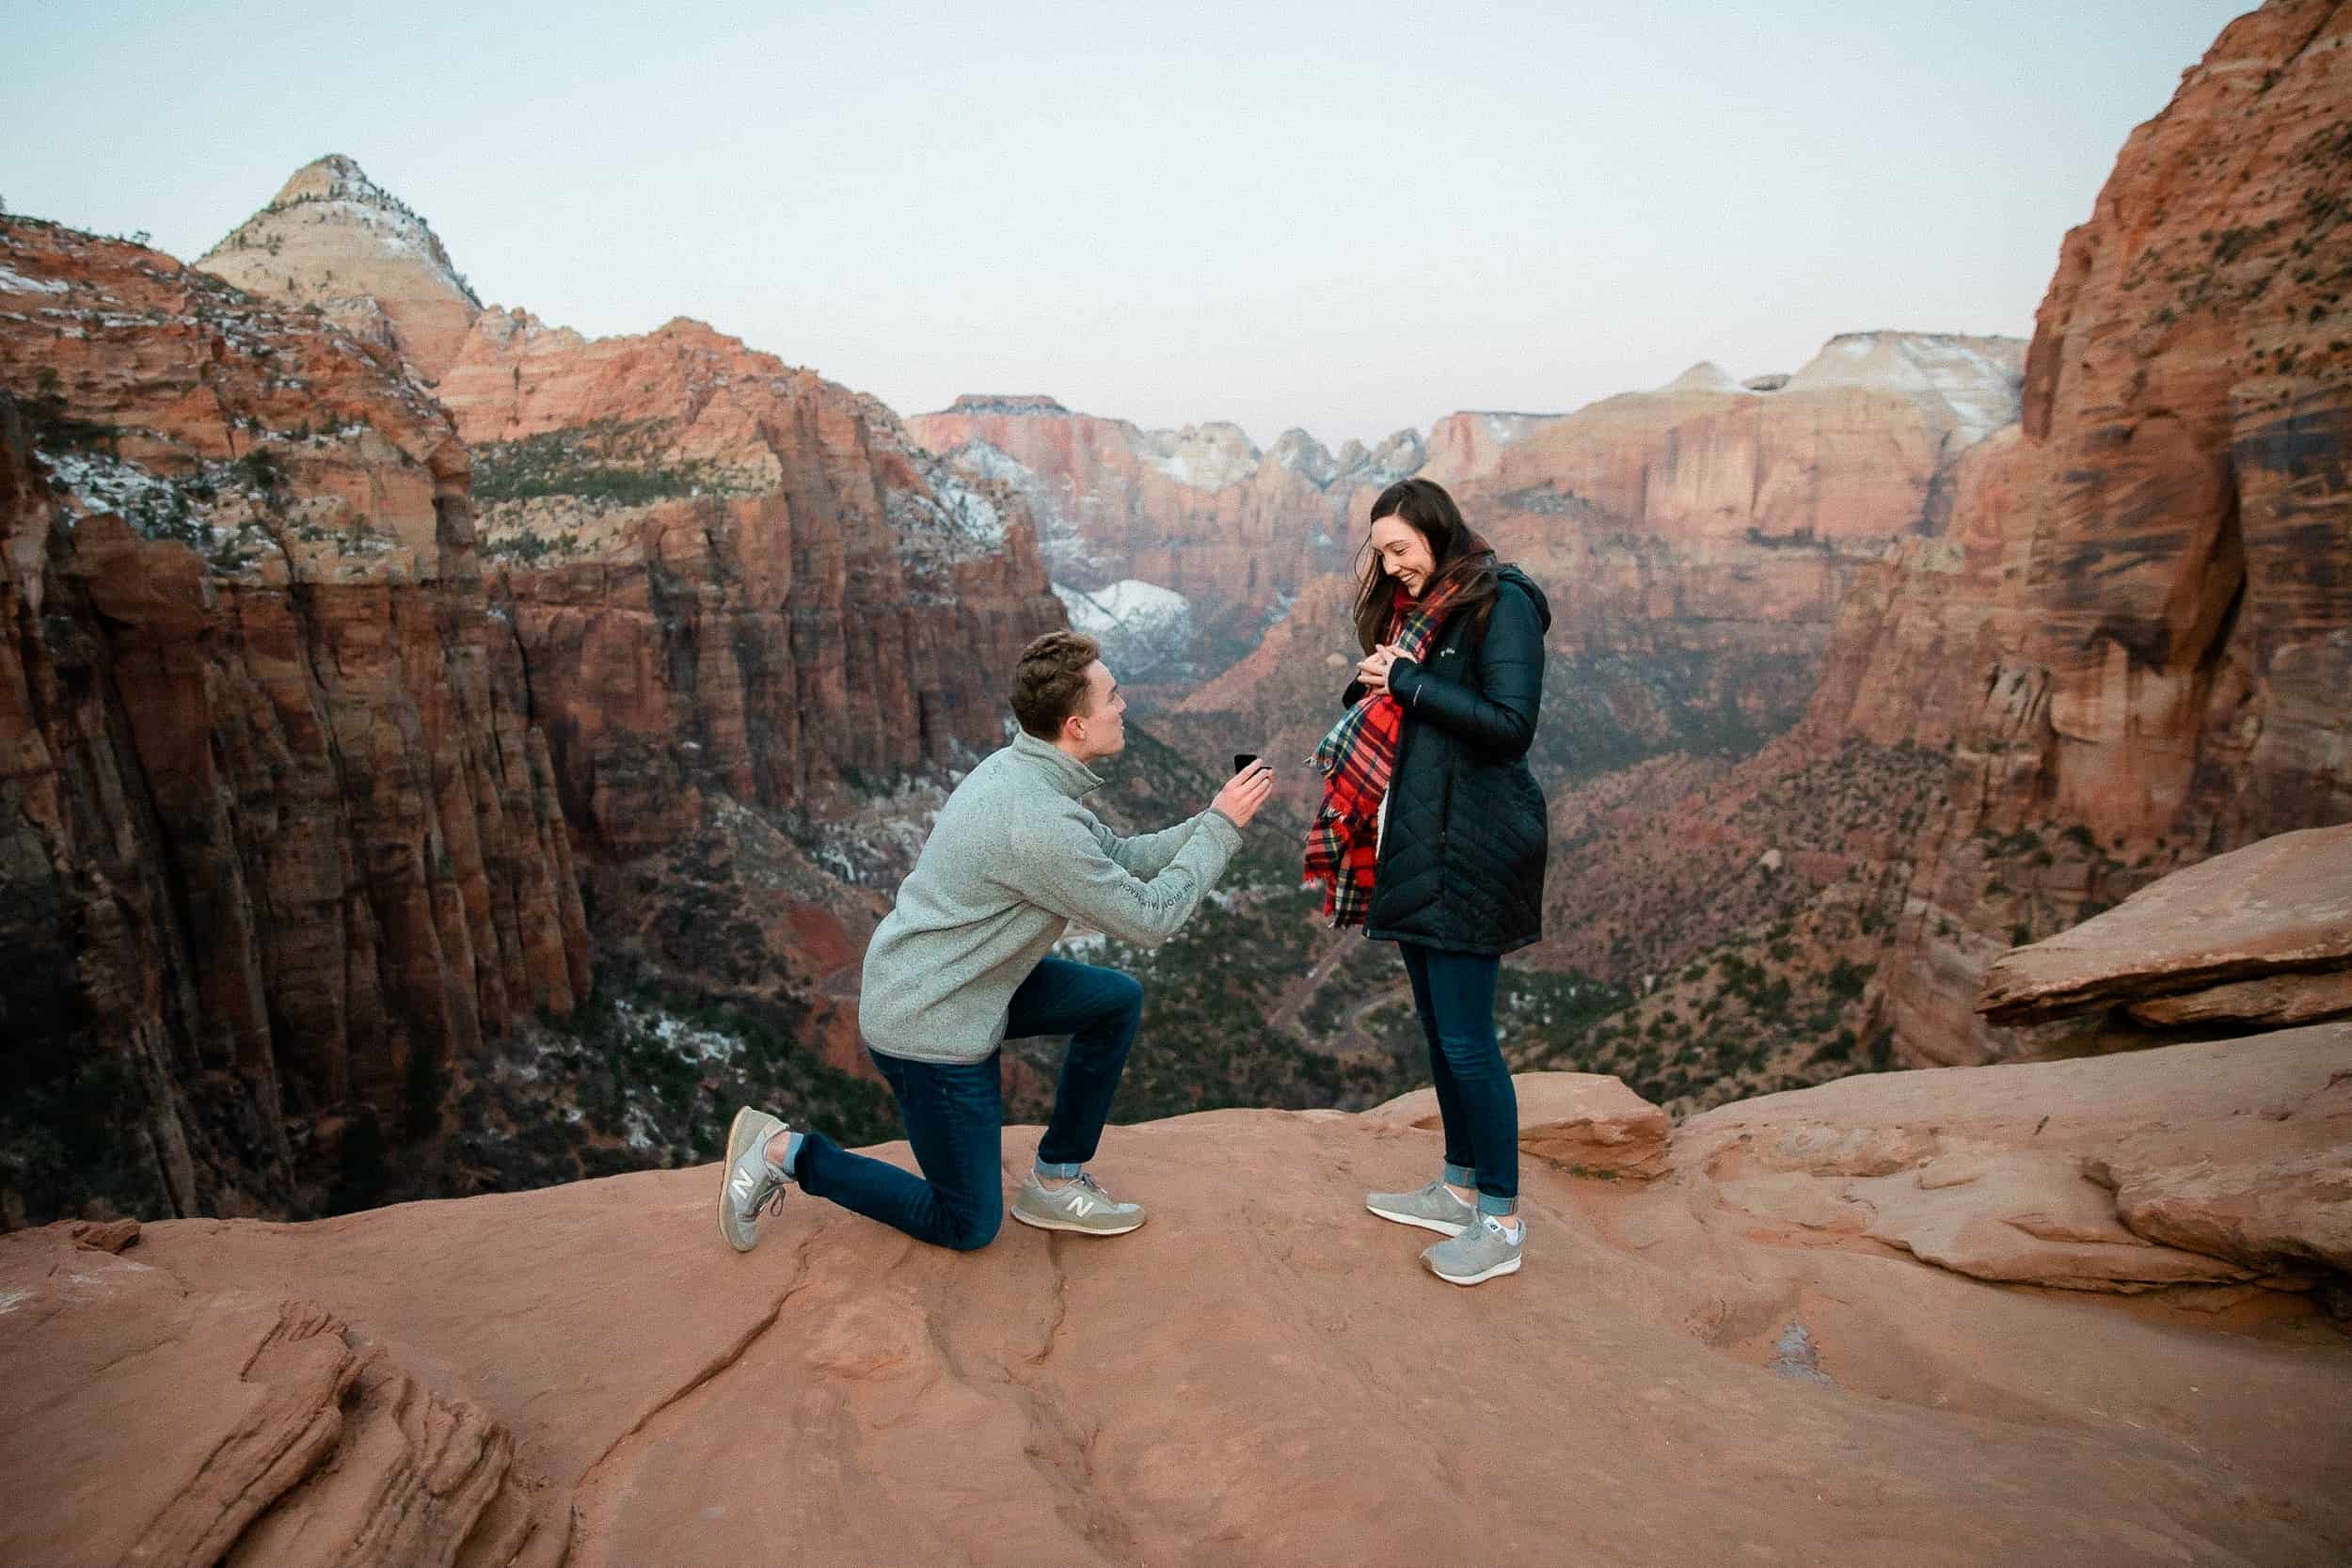 Guy proposes to girlfriend in Zion National Park